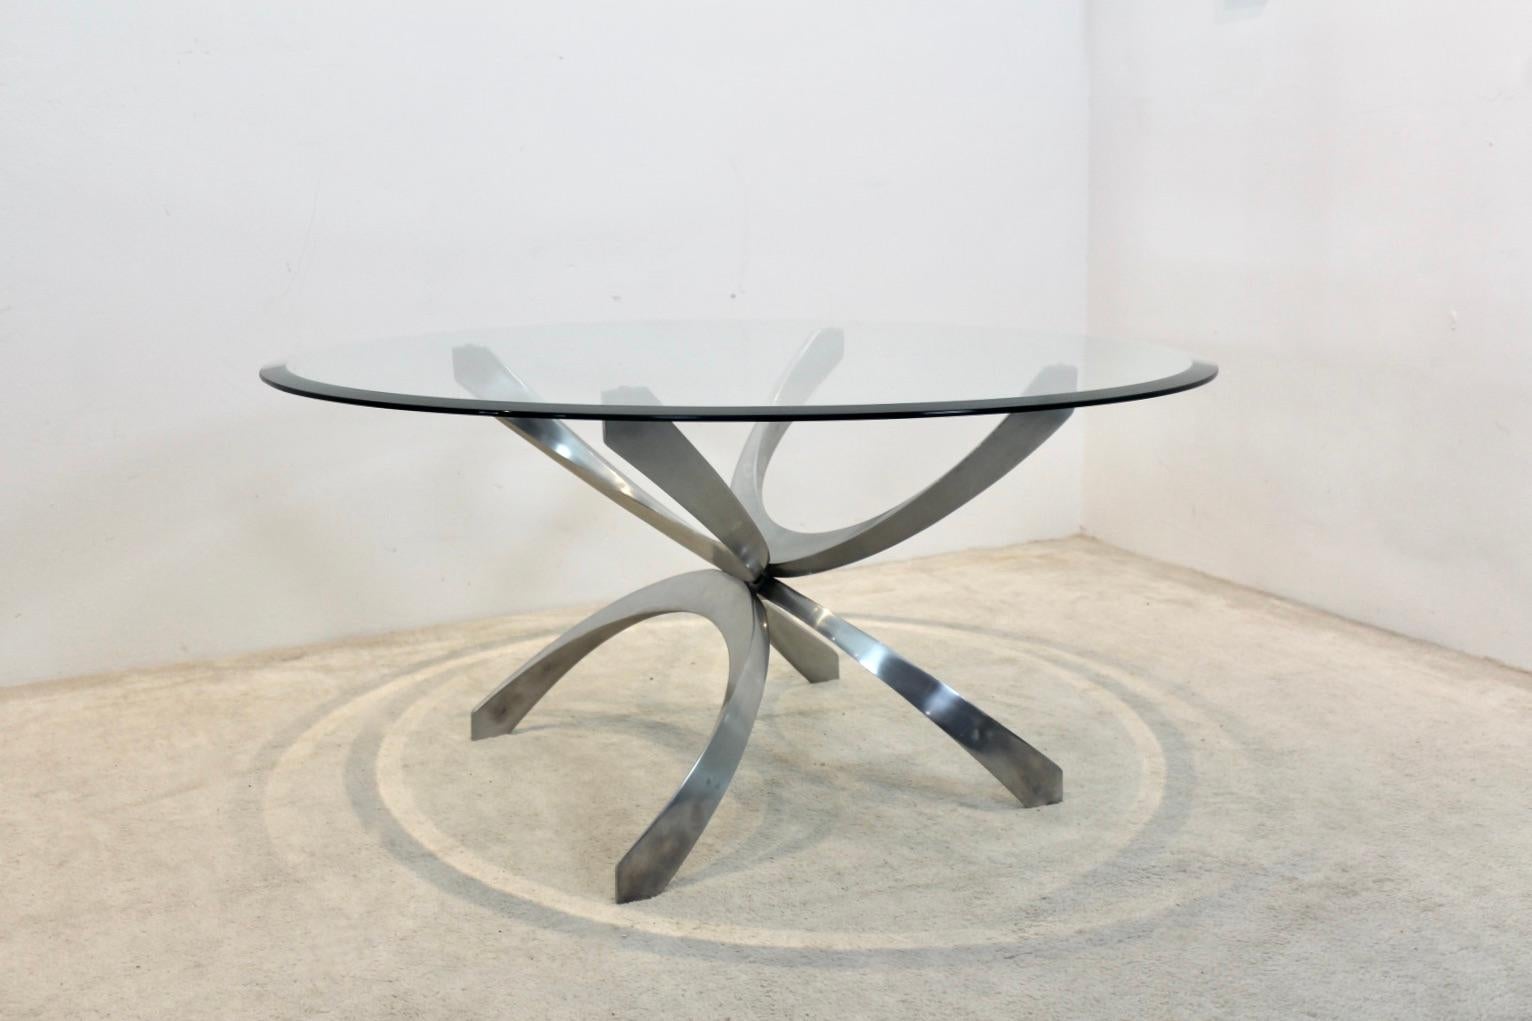 Modernist Sculptural Aluminum and Glass Coffee Table by Knut Hesterberg, 1970s For Sale 2